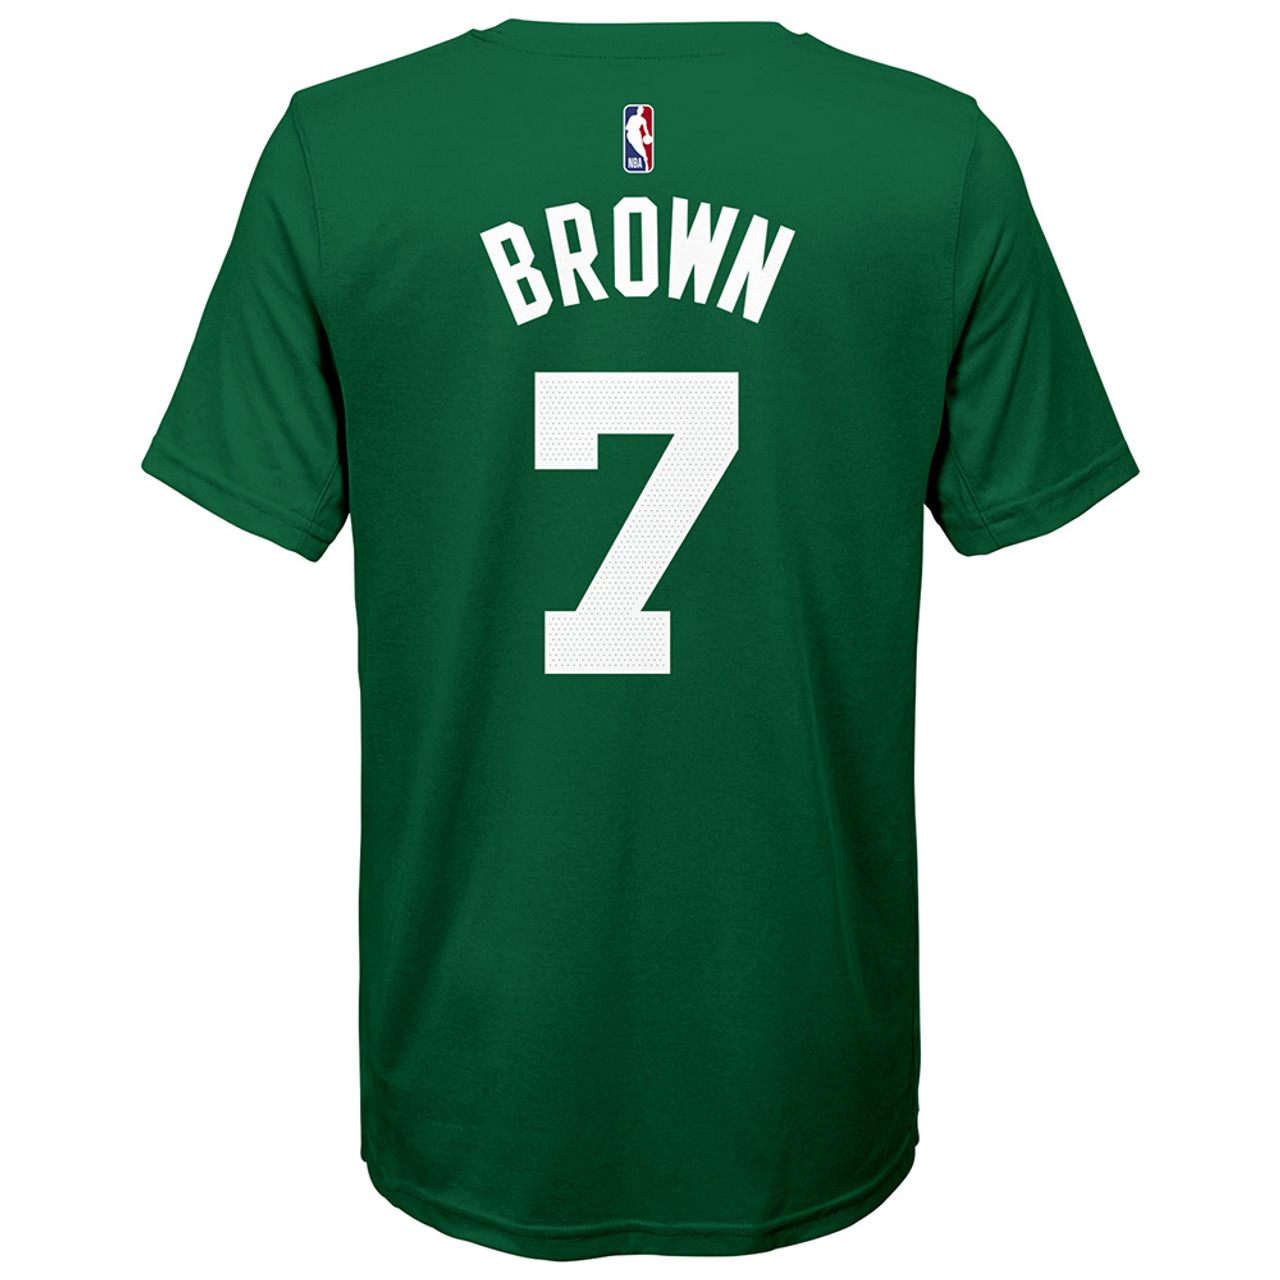 Youth Brown Nike Name and Number Tee | Boston Pro Shop